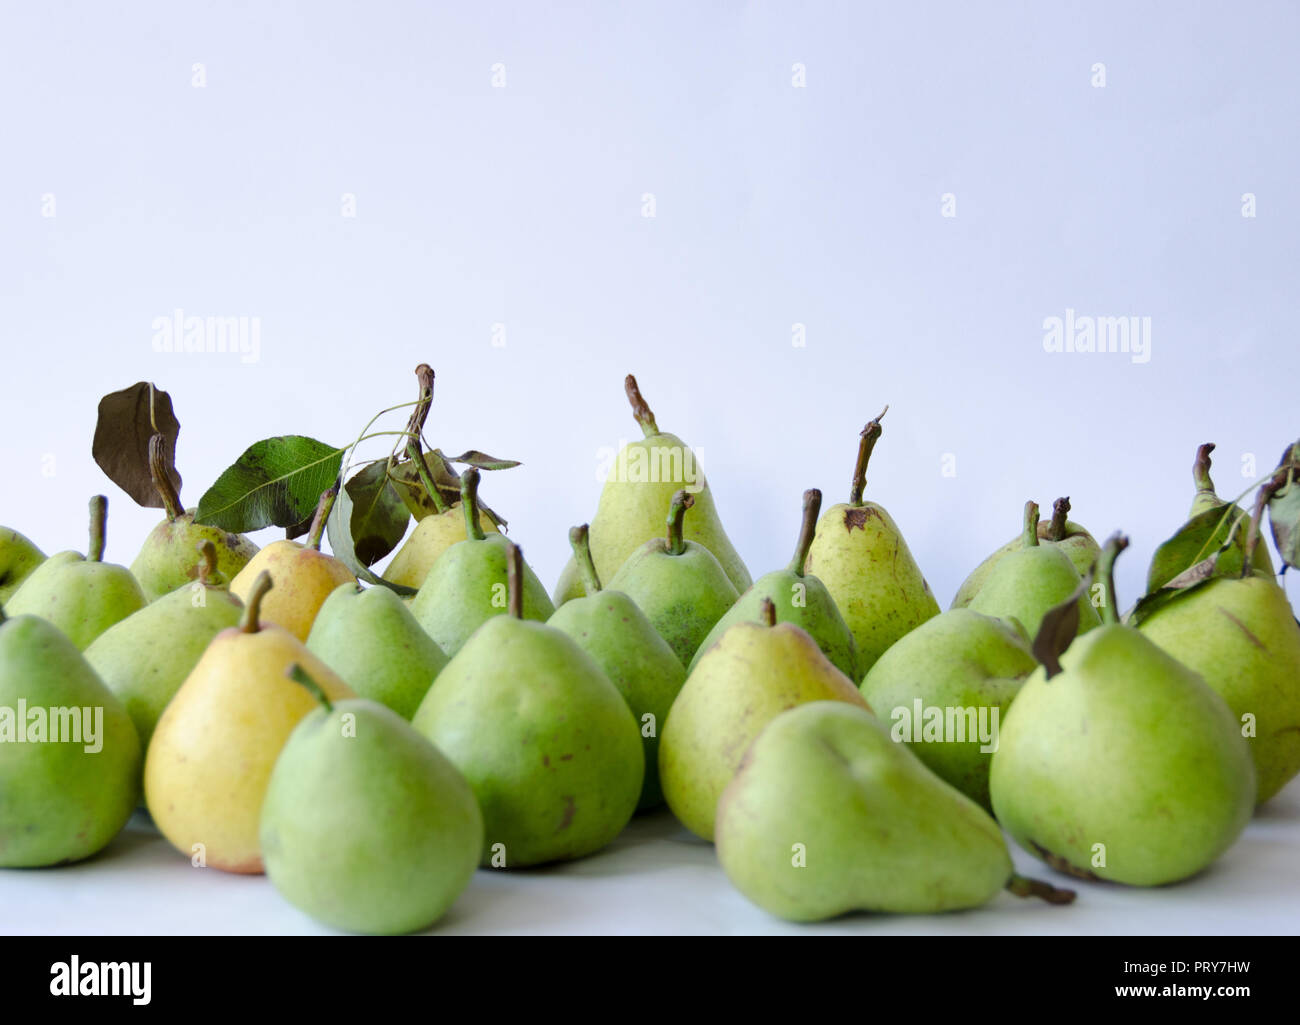 A group of handpicked pears during autumn Stock Photo